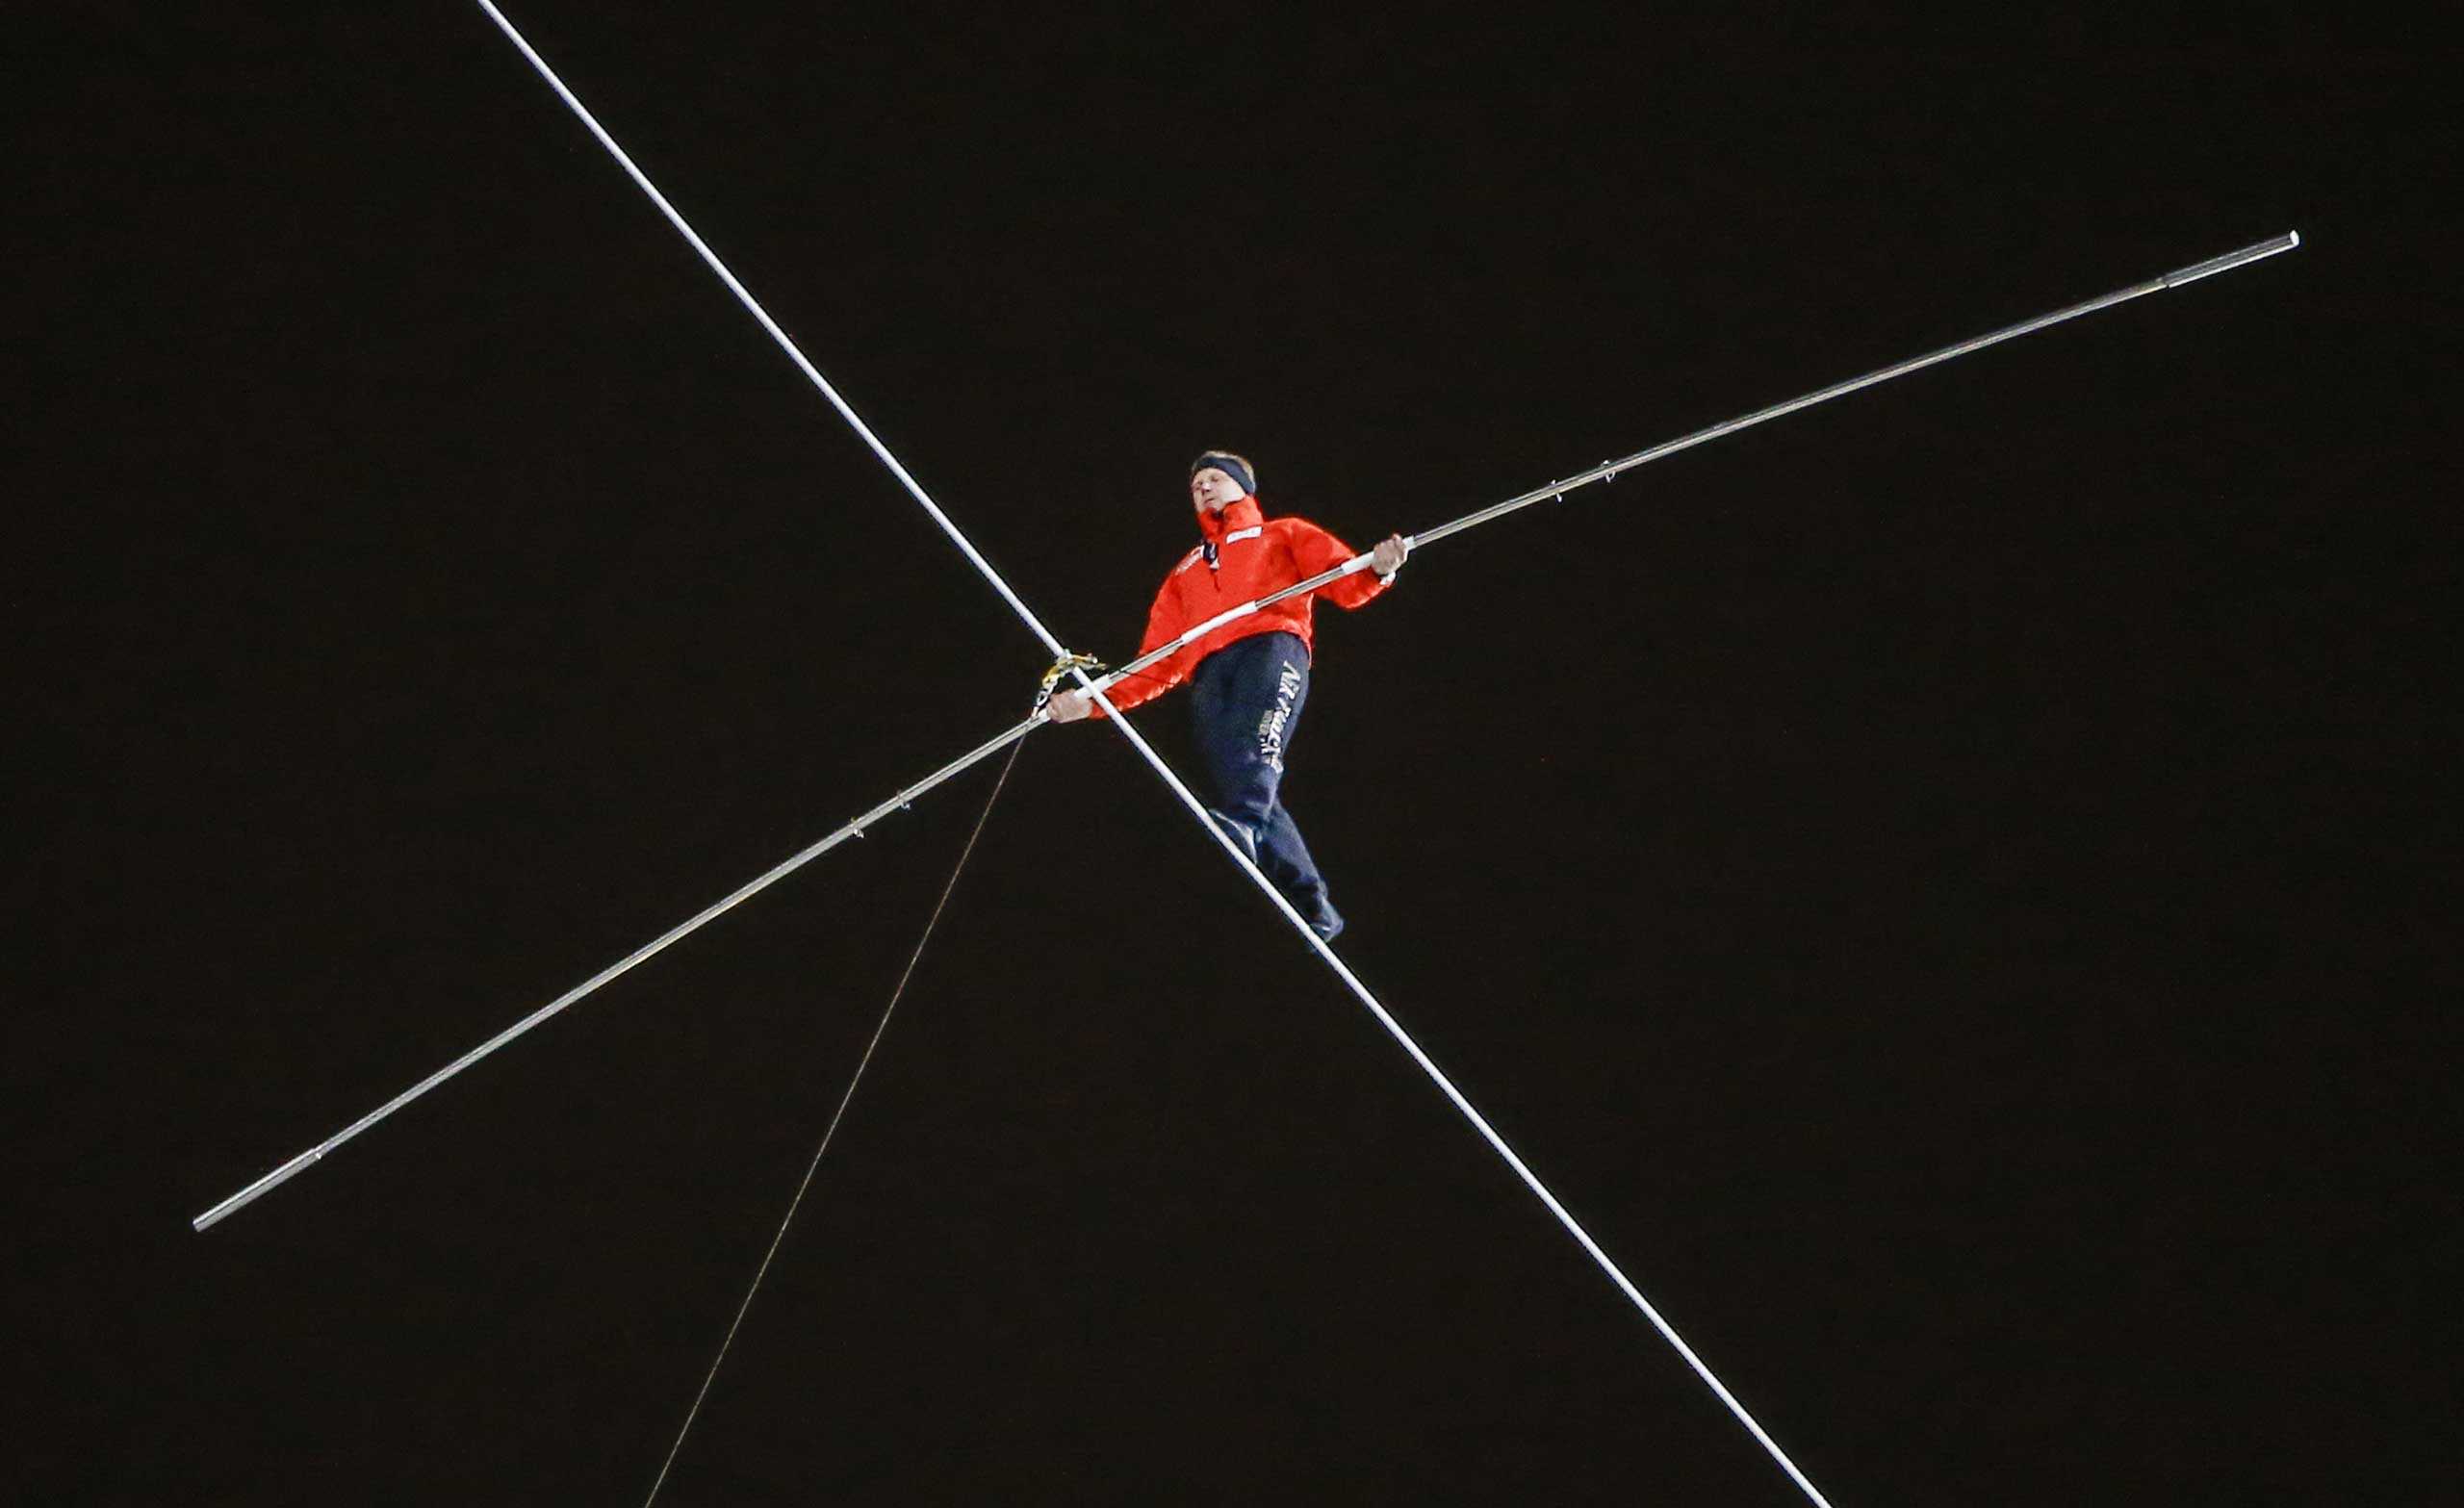 High-wire performer Nik Wallenda walks on a 3/4 inch (1.91 cm) wire between buildings across the Chicago River in Chicago, Nov. 2, 2014. (Tannen Maury—EPA)